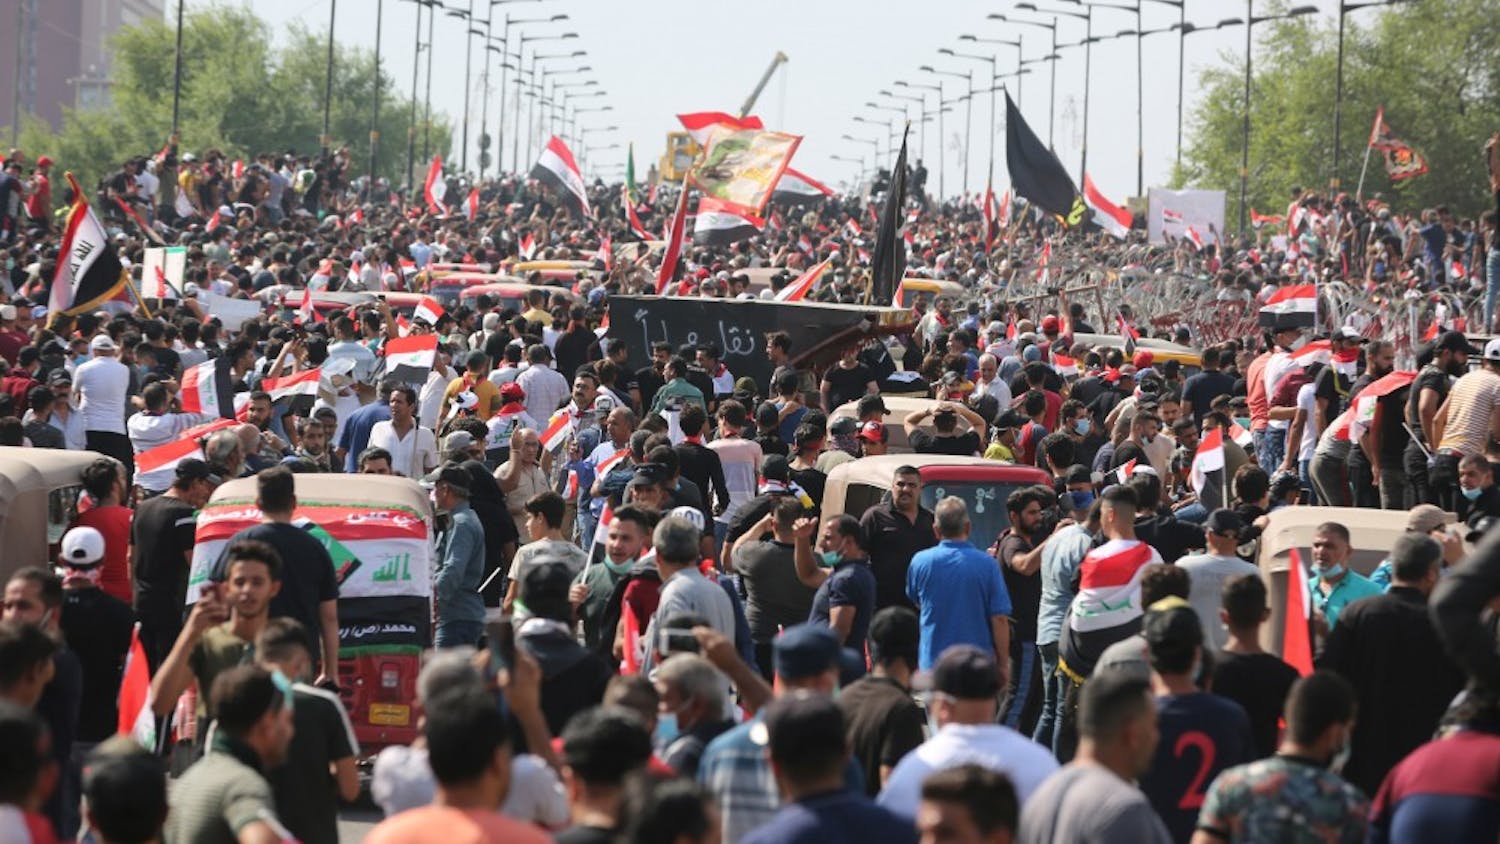 Protesters try to cross al-Jumhouriya bridge to reach the Green Zone on Oct. 25 in Baghdad. Hundreds of protesters rallied Friday in some Iraqi cities including capital Baghdad, amid the resumed anti-government demonstrations over unemployment, corruption and lack of public services. 